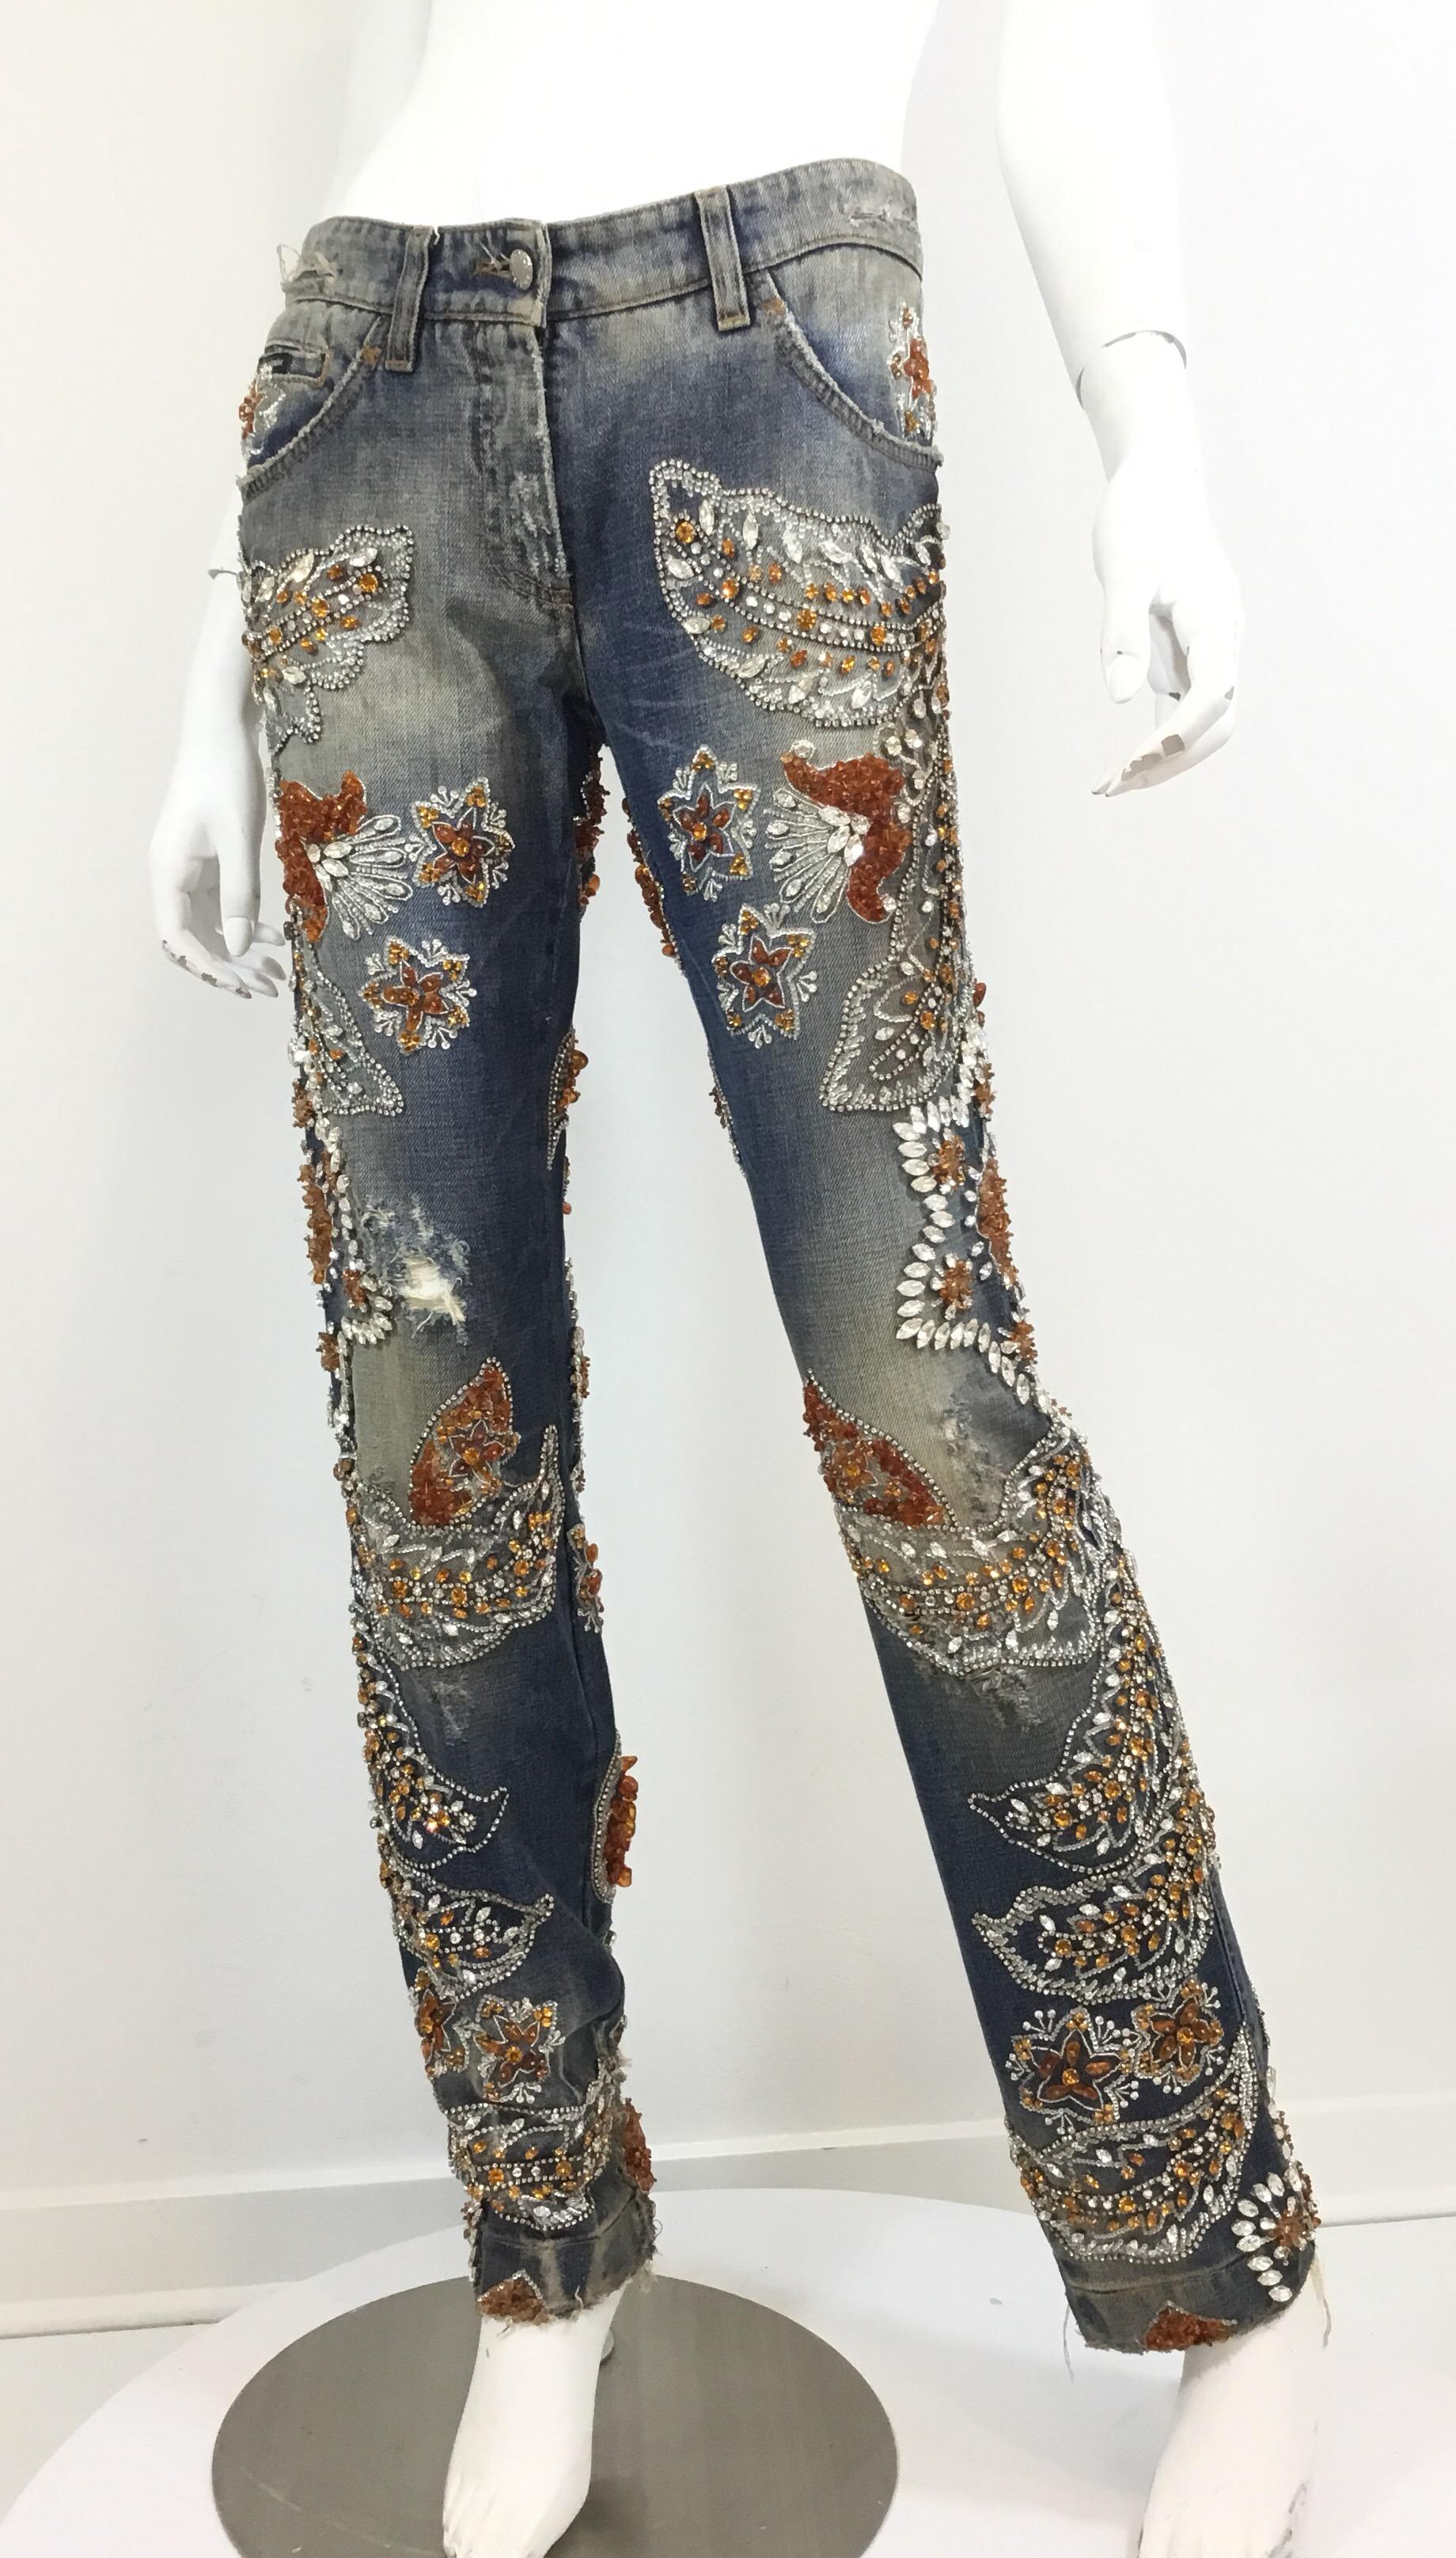 Dolce & Gabbana Jeans from Spring 2005 features rhinestone,Sequin, and bead embellishing throughout. Jeans heave funtcional front and back pockets, zipper and button fastening. Labeled Size 42, made in Italy.

Retail $20,000

Measurements:
Waist